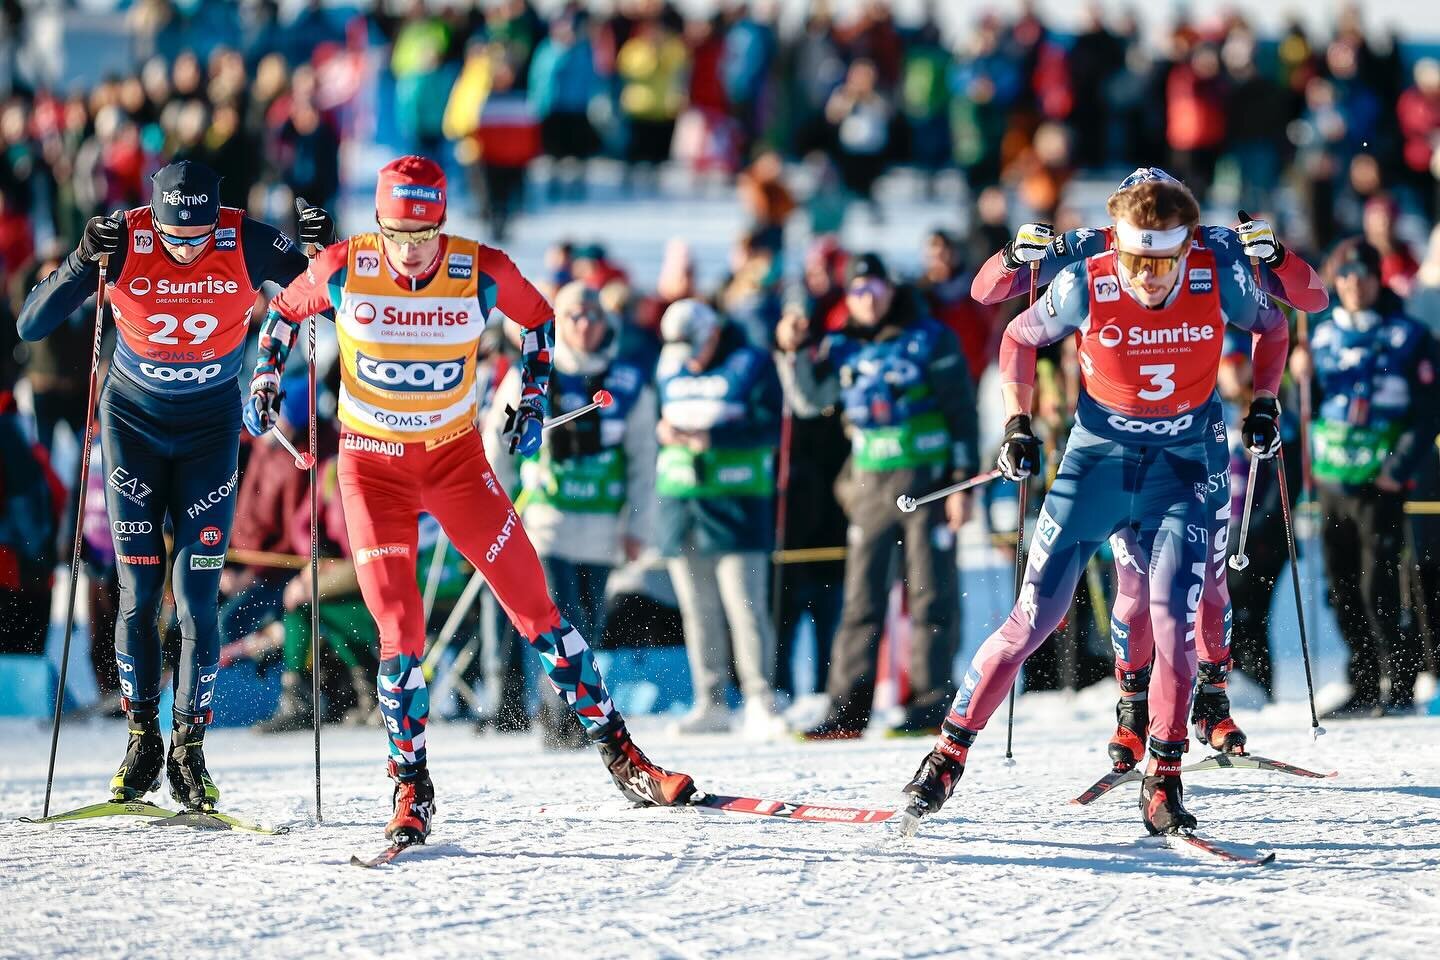 &ldquo;We&rsquo;re fools to make war with our brothers in arms&rdquo; - Mark Knopfler #stifelusskiteam